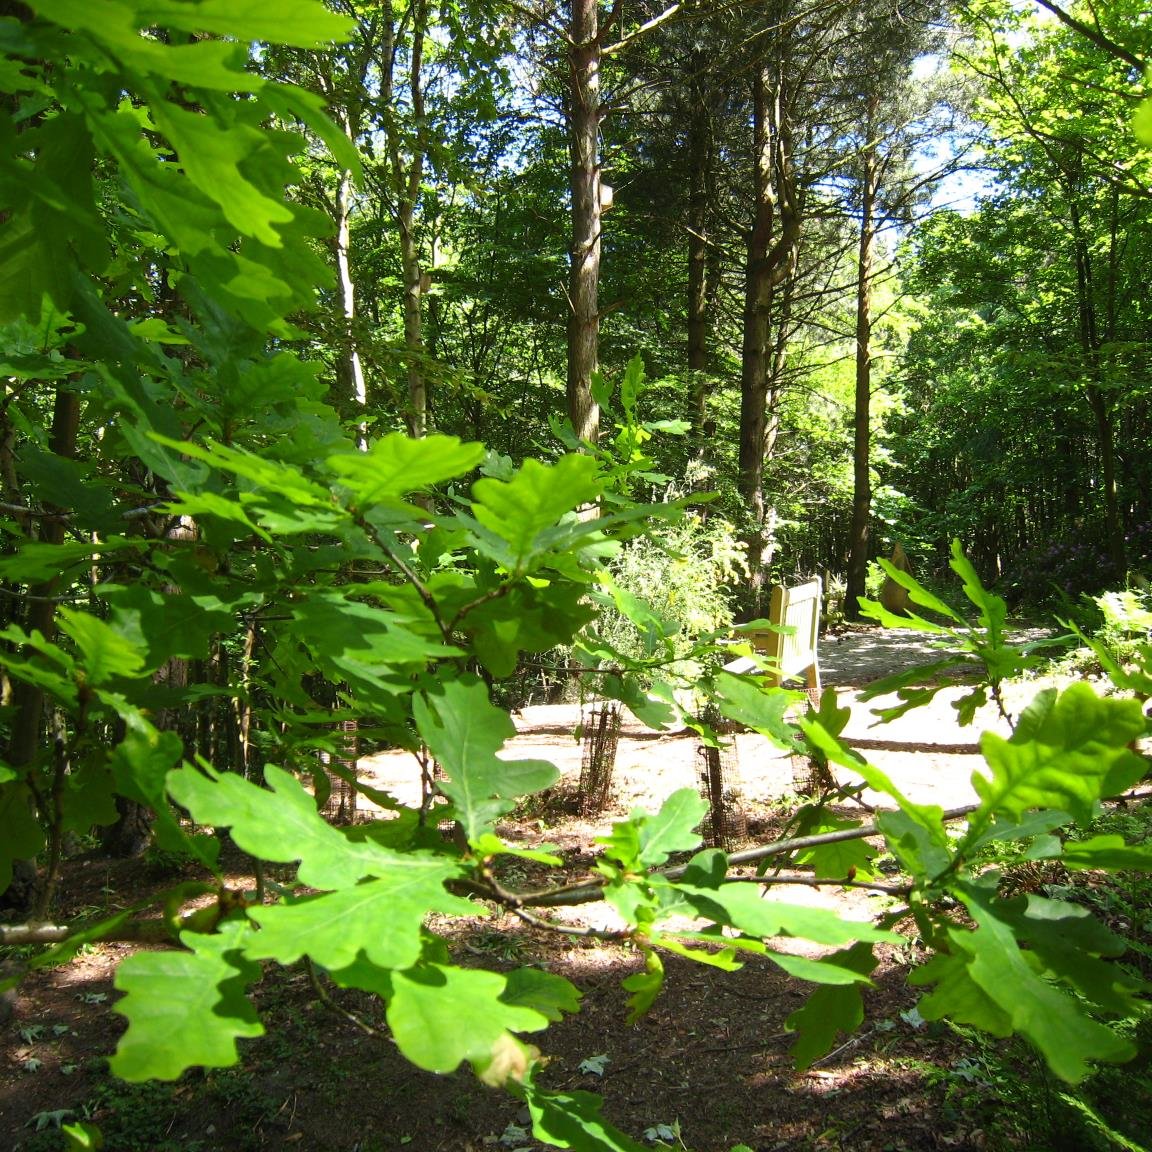 Marketing and Community Liaison for GreenAcres Woodland Burials - Colney.